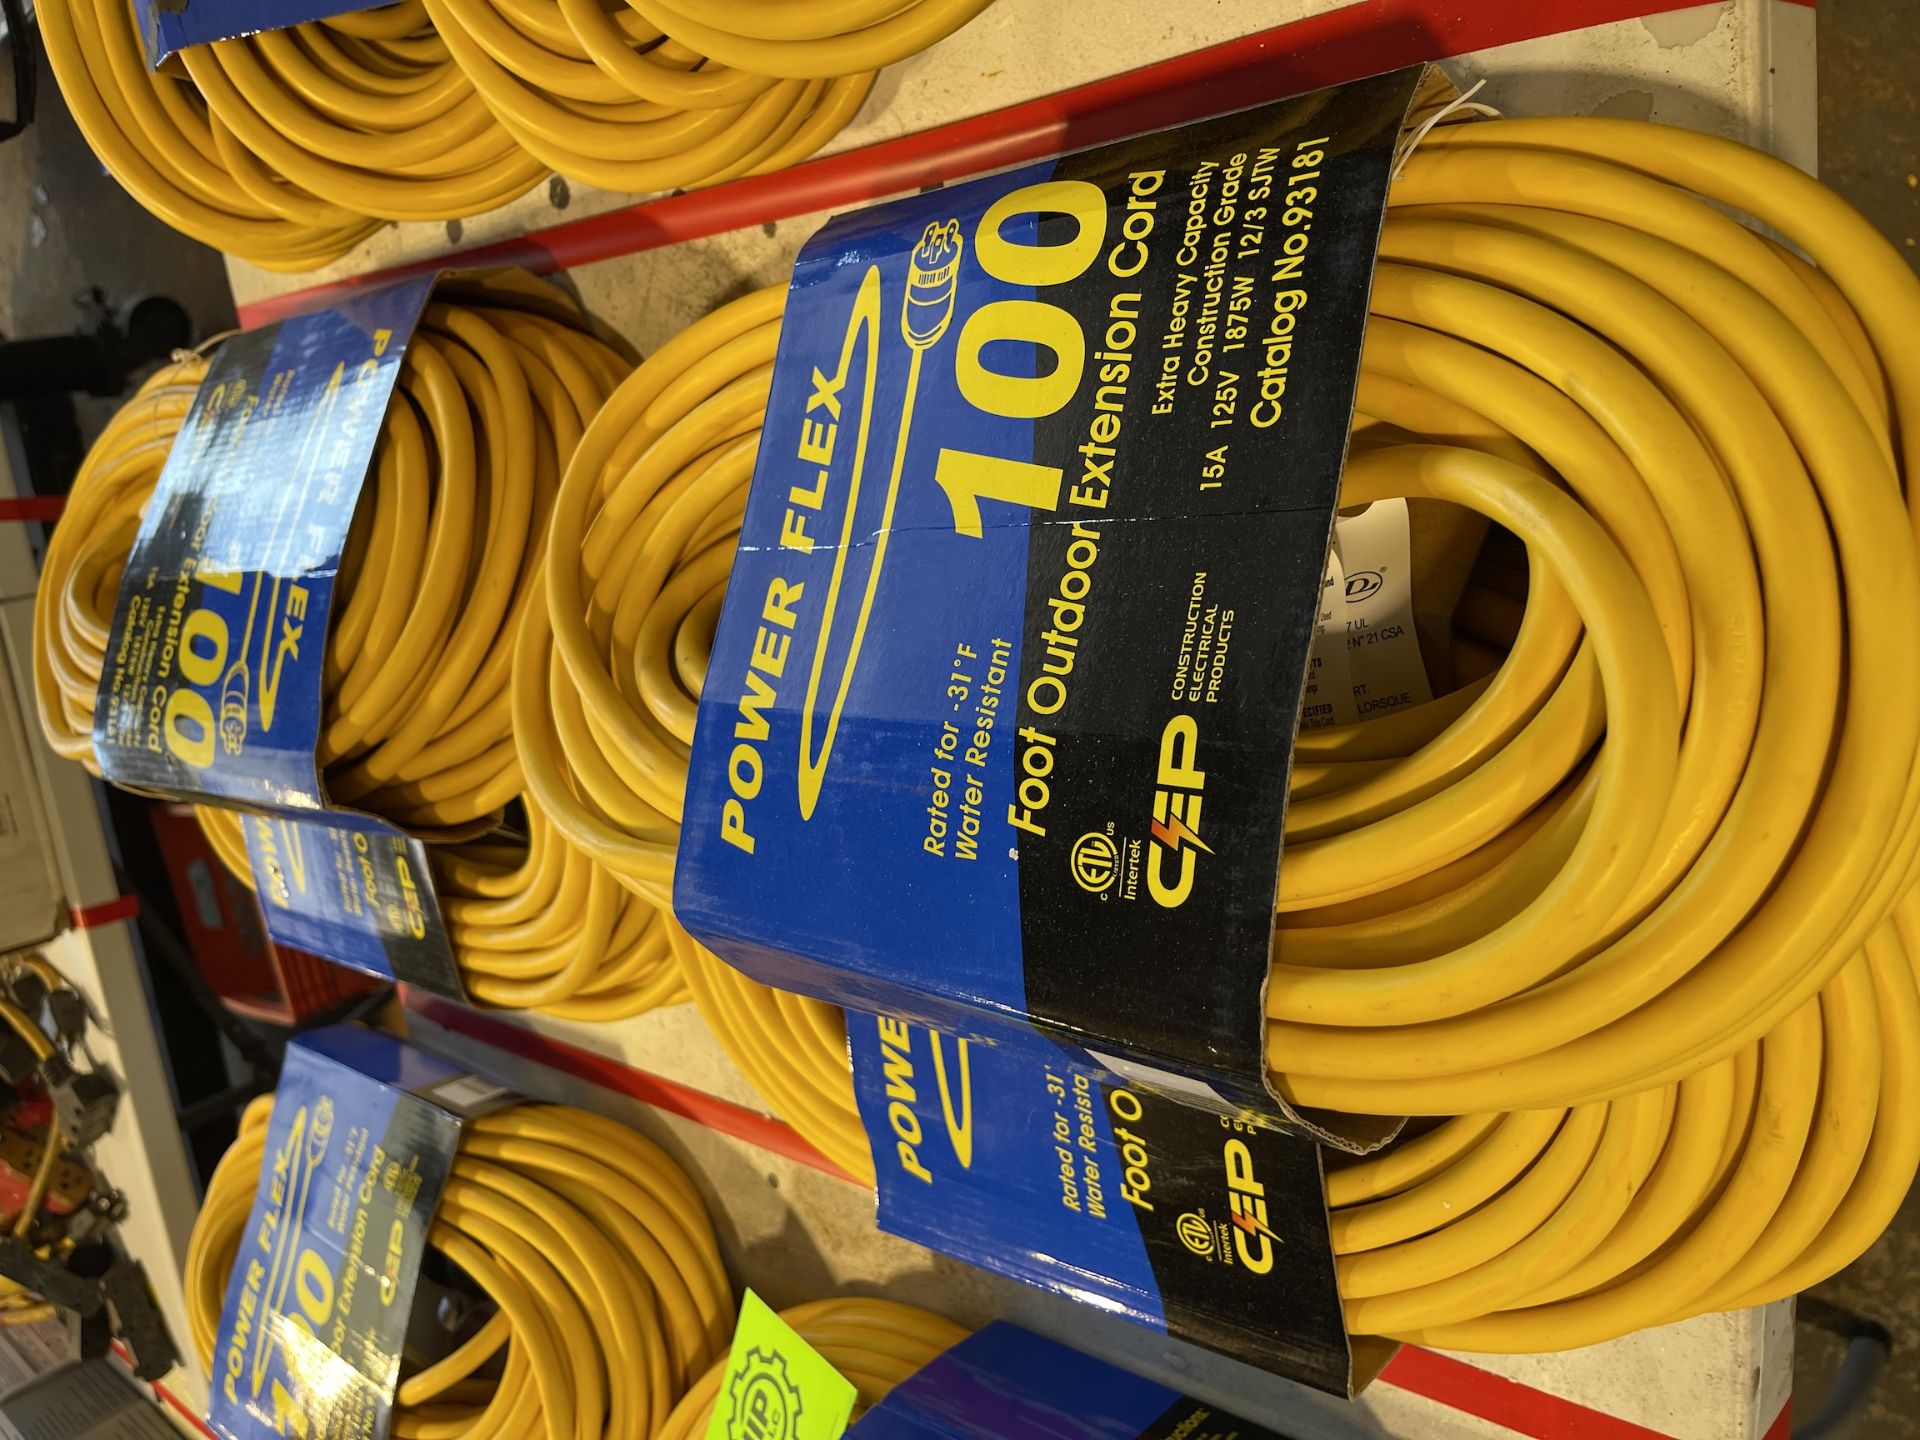 Lot of 4 100ft Outdoor Extension Cords - Upland - Image 3 of 4